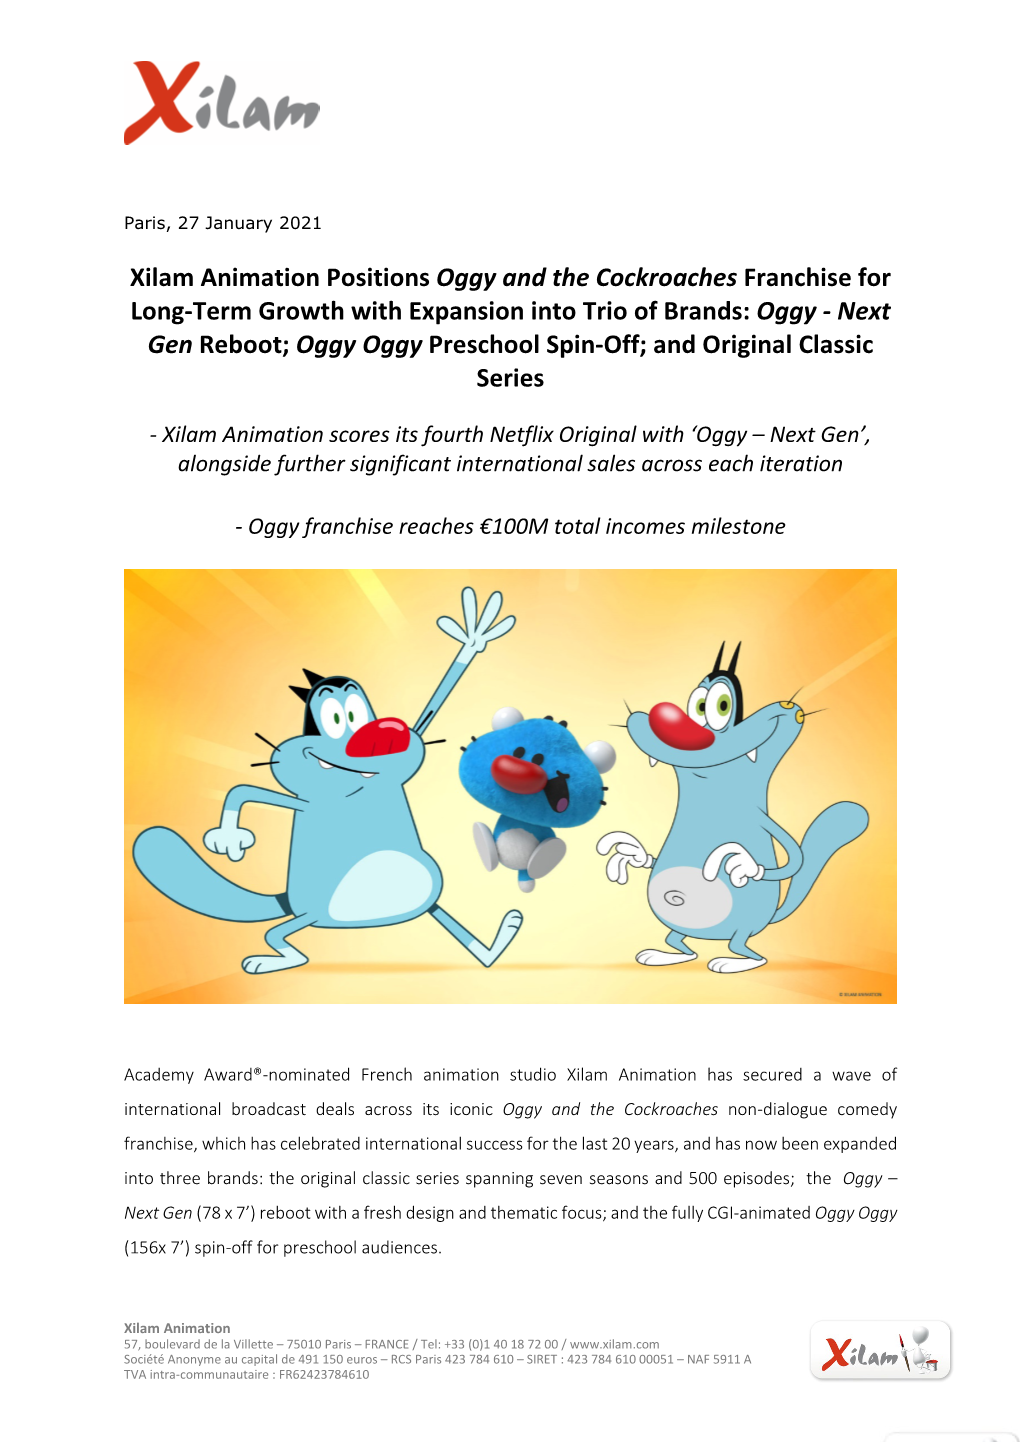 Xilam Animation Positions Oggy and the Cockroaches Franchise For